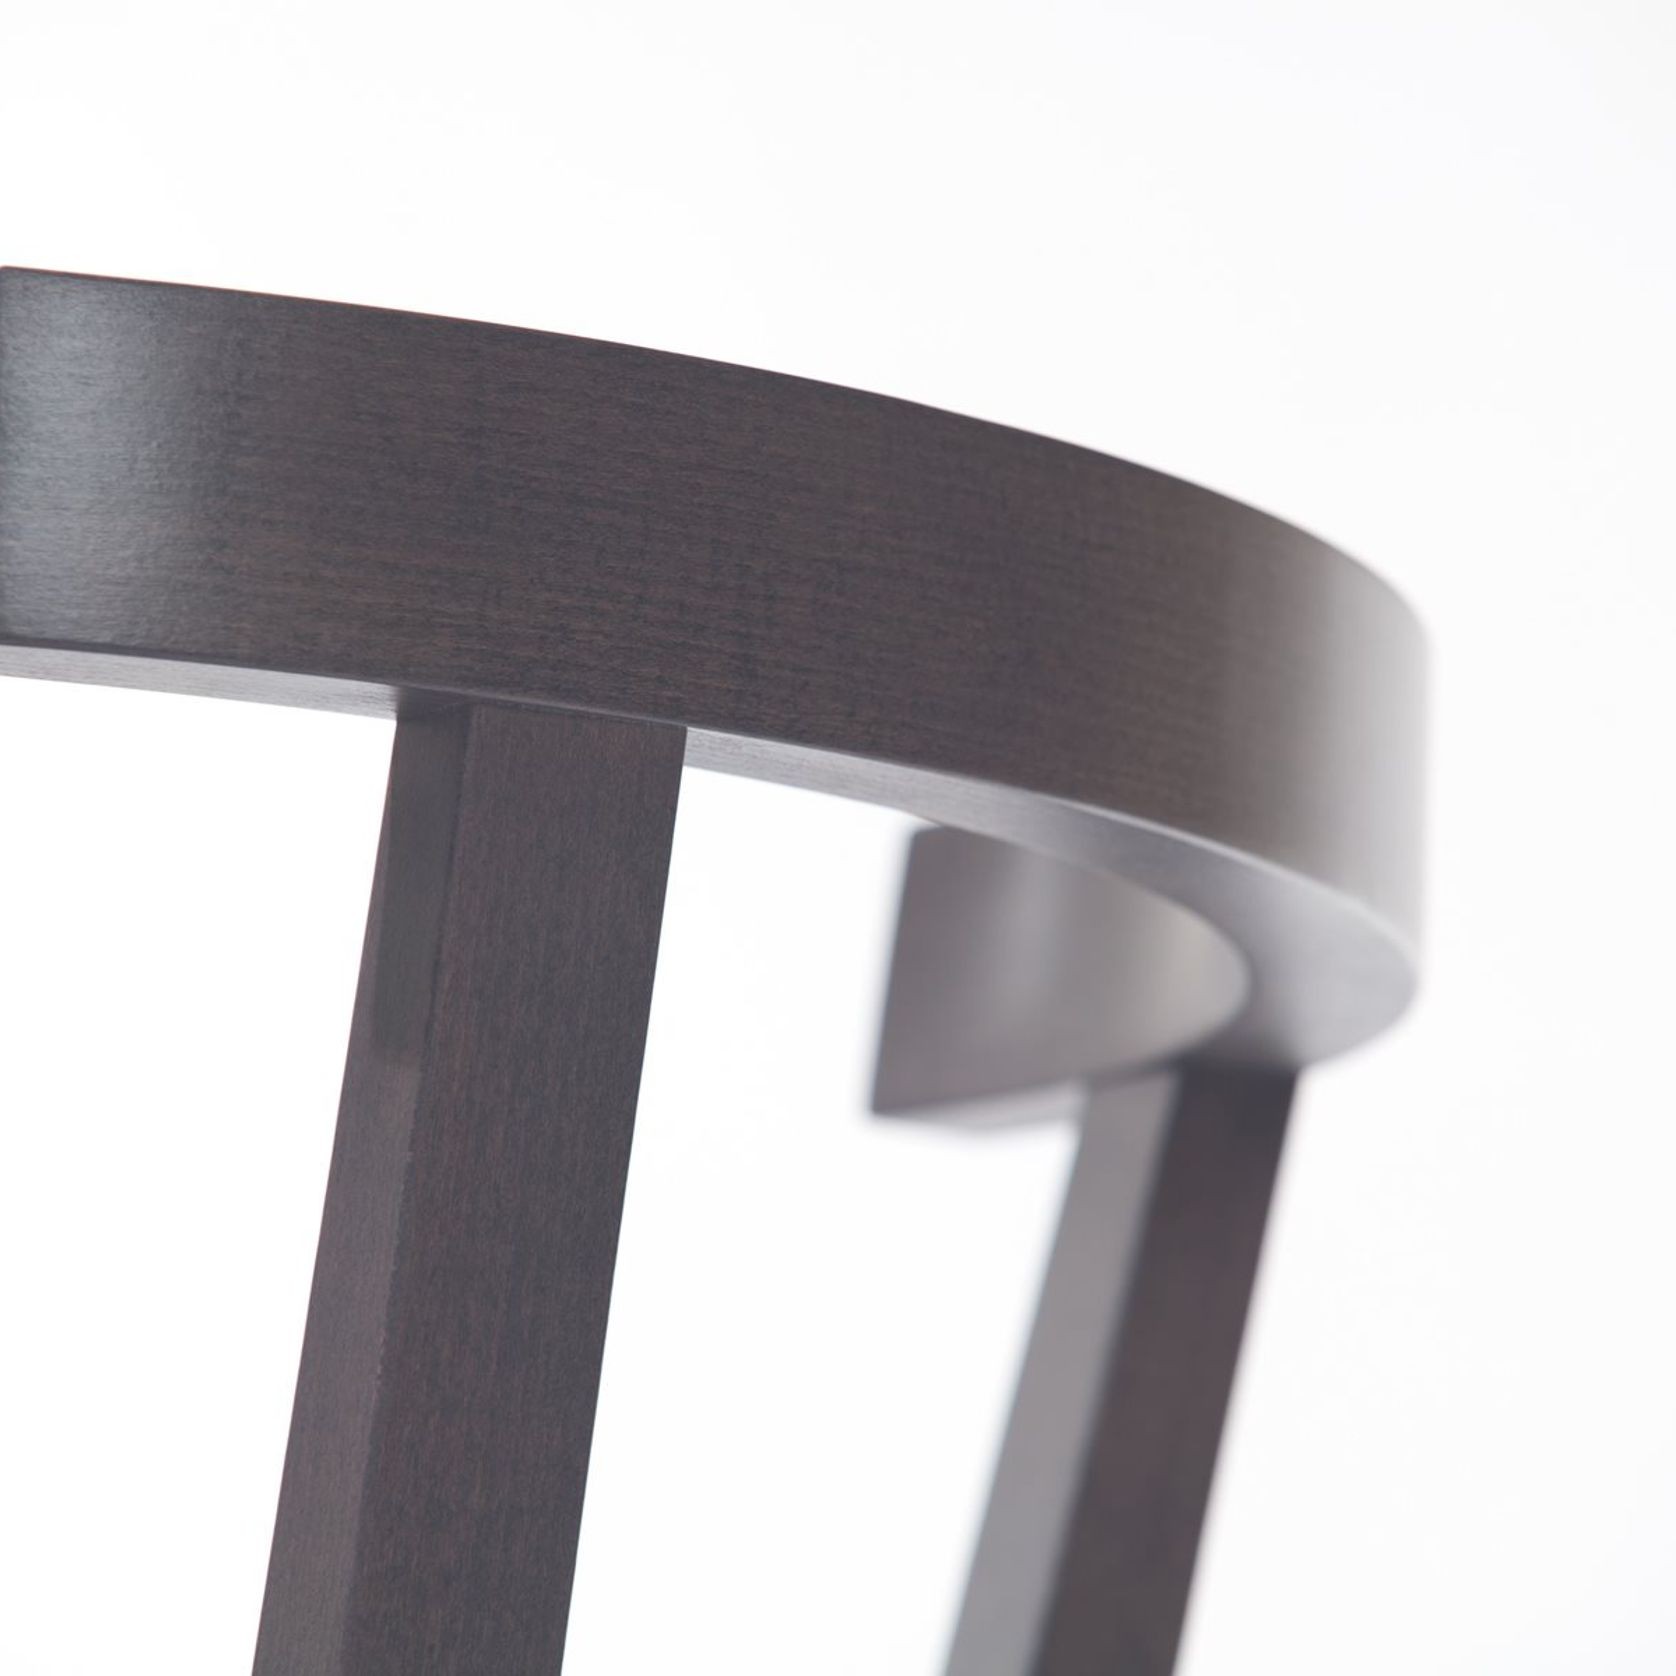 Punton Chair by TON gallery detail image